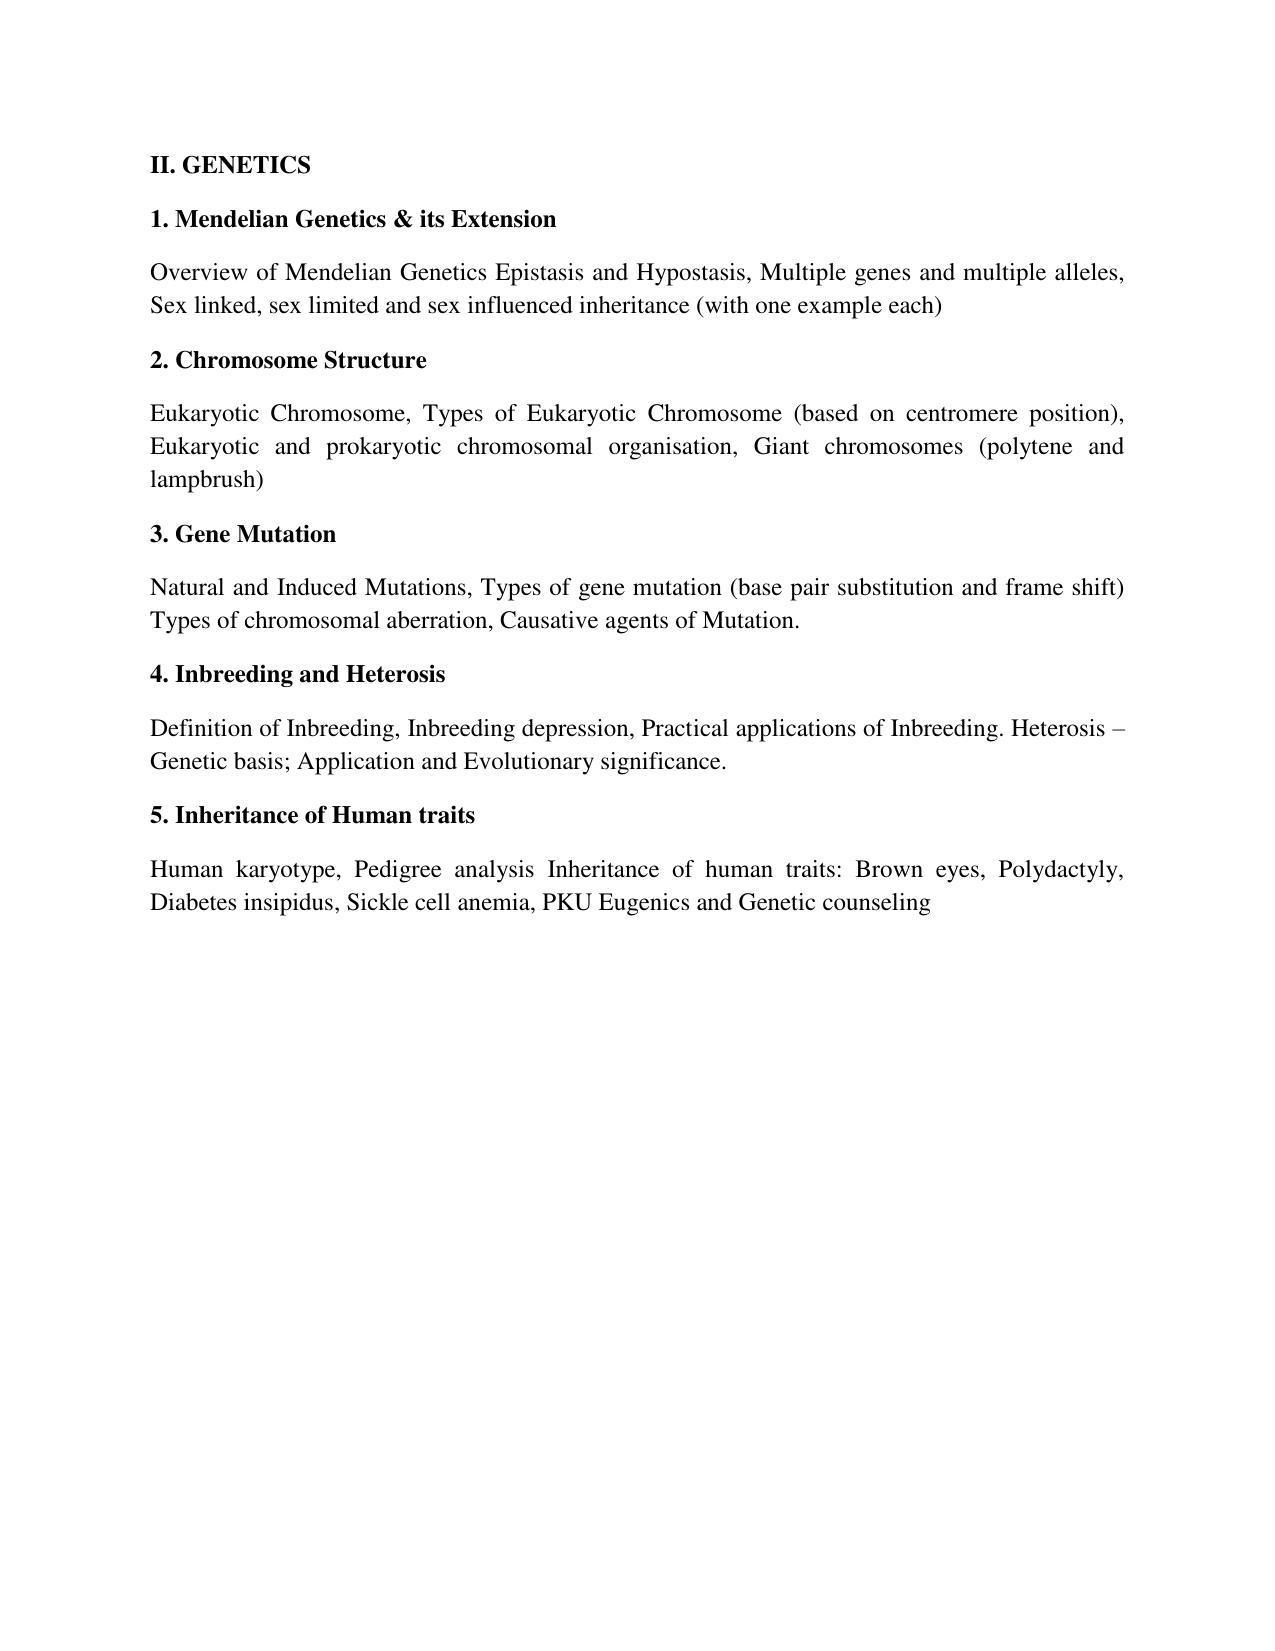 GU ART Post Graduate Diploma in Clinical Genetics and Medical Laboratory Techniques (PGDCG & MLT) Syllabus - Page 2